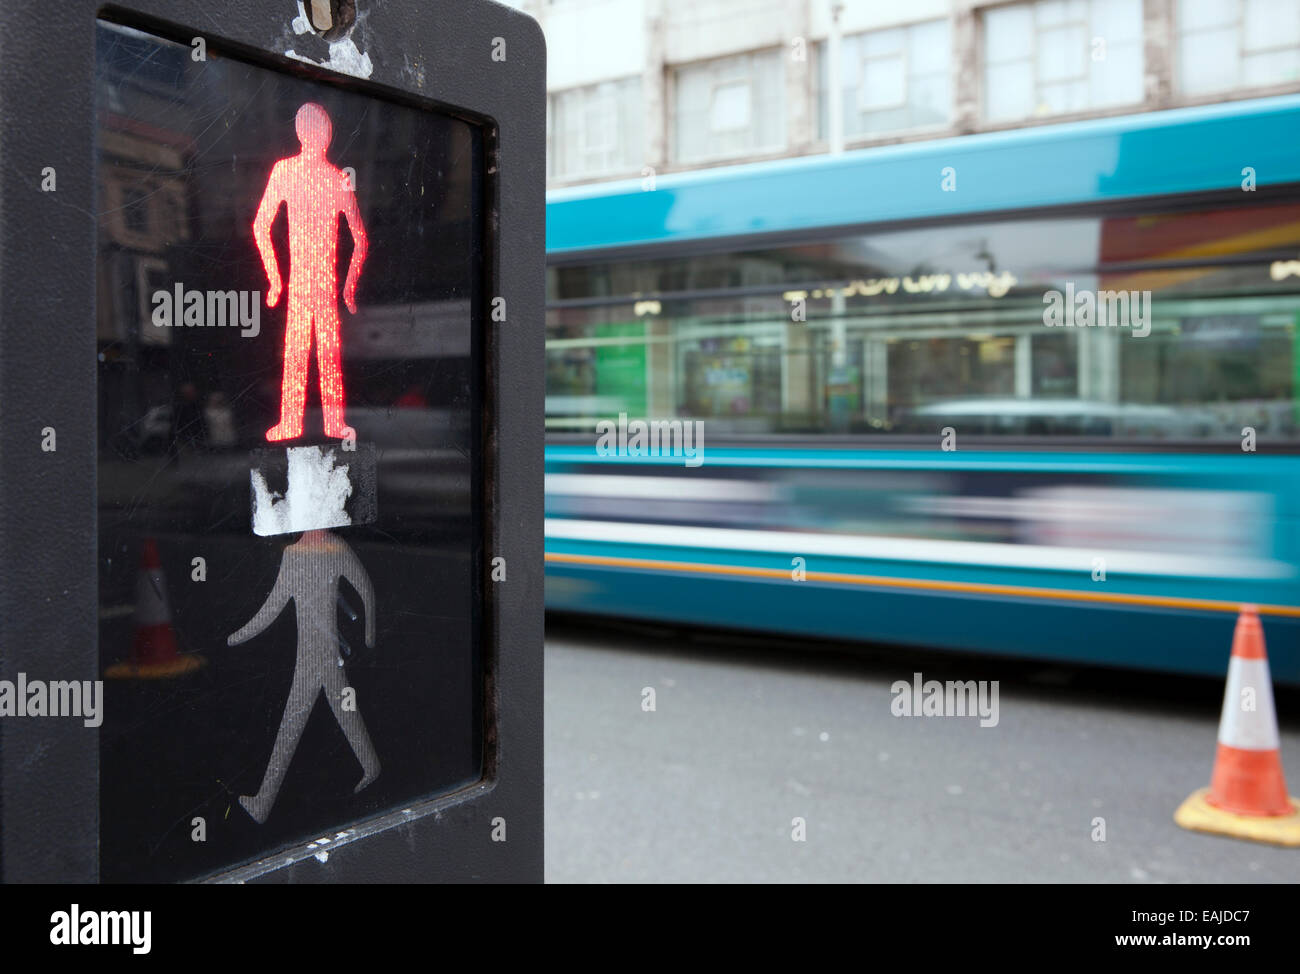 Motion blurred people crossing at pelican crossing Southport, Merseyside, UK Stock Photo